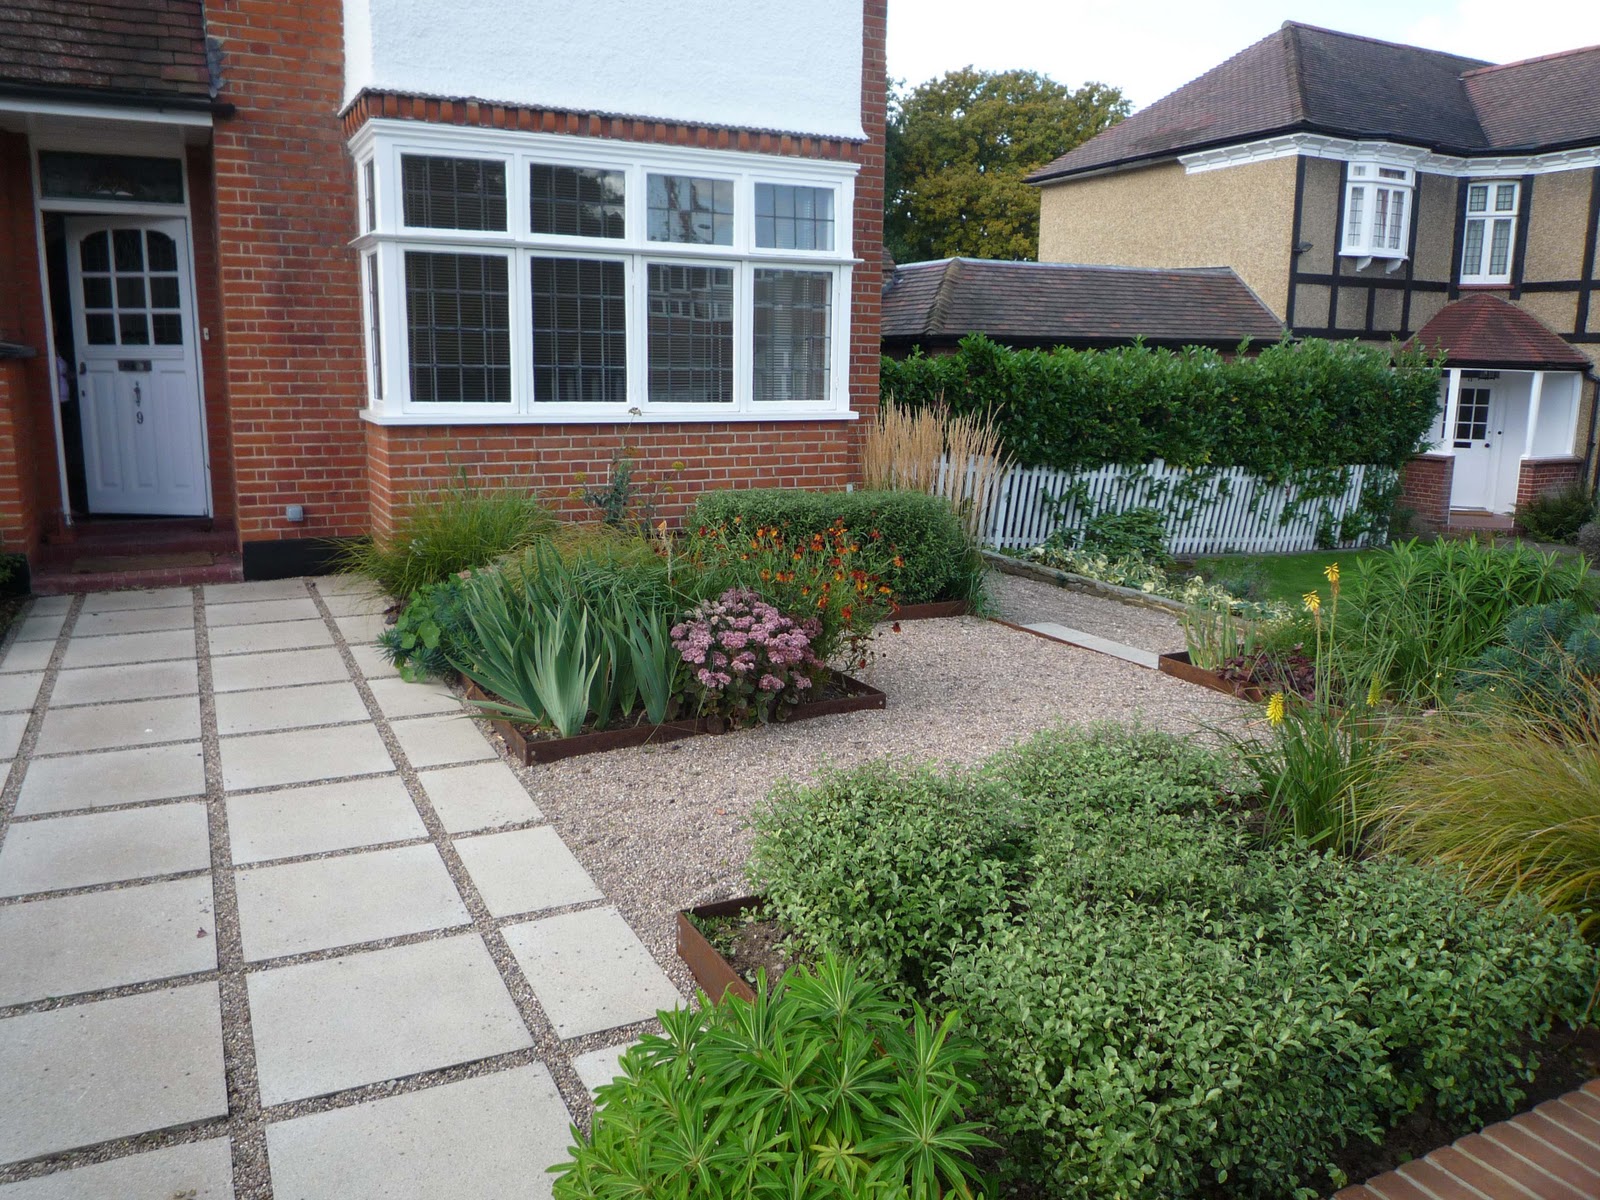 Fenton Roberts Garden Design: See our new Houzz pages